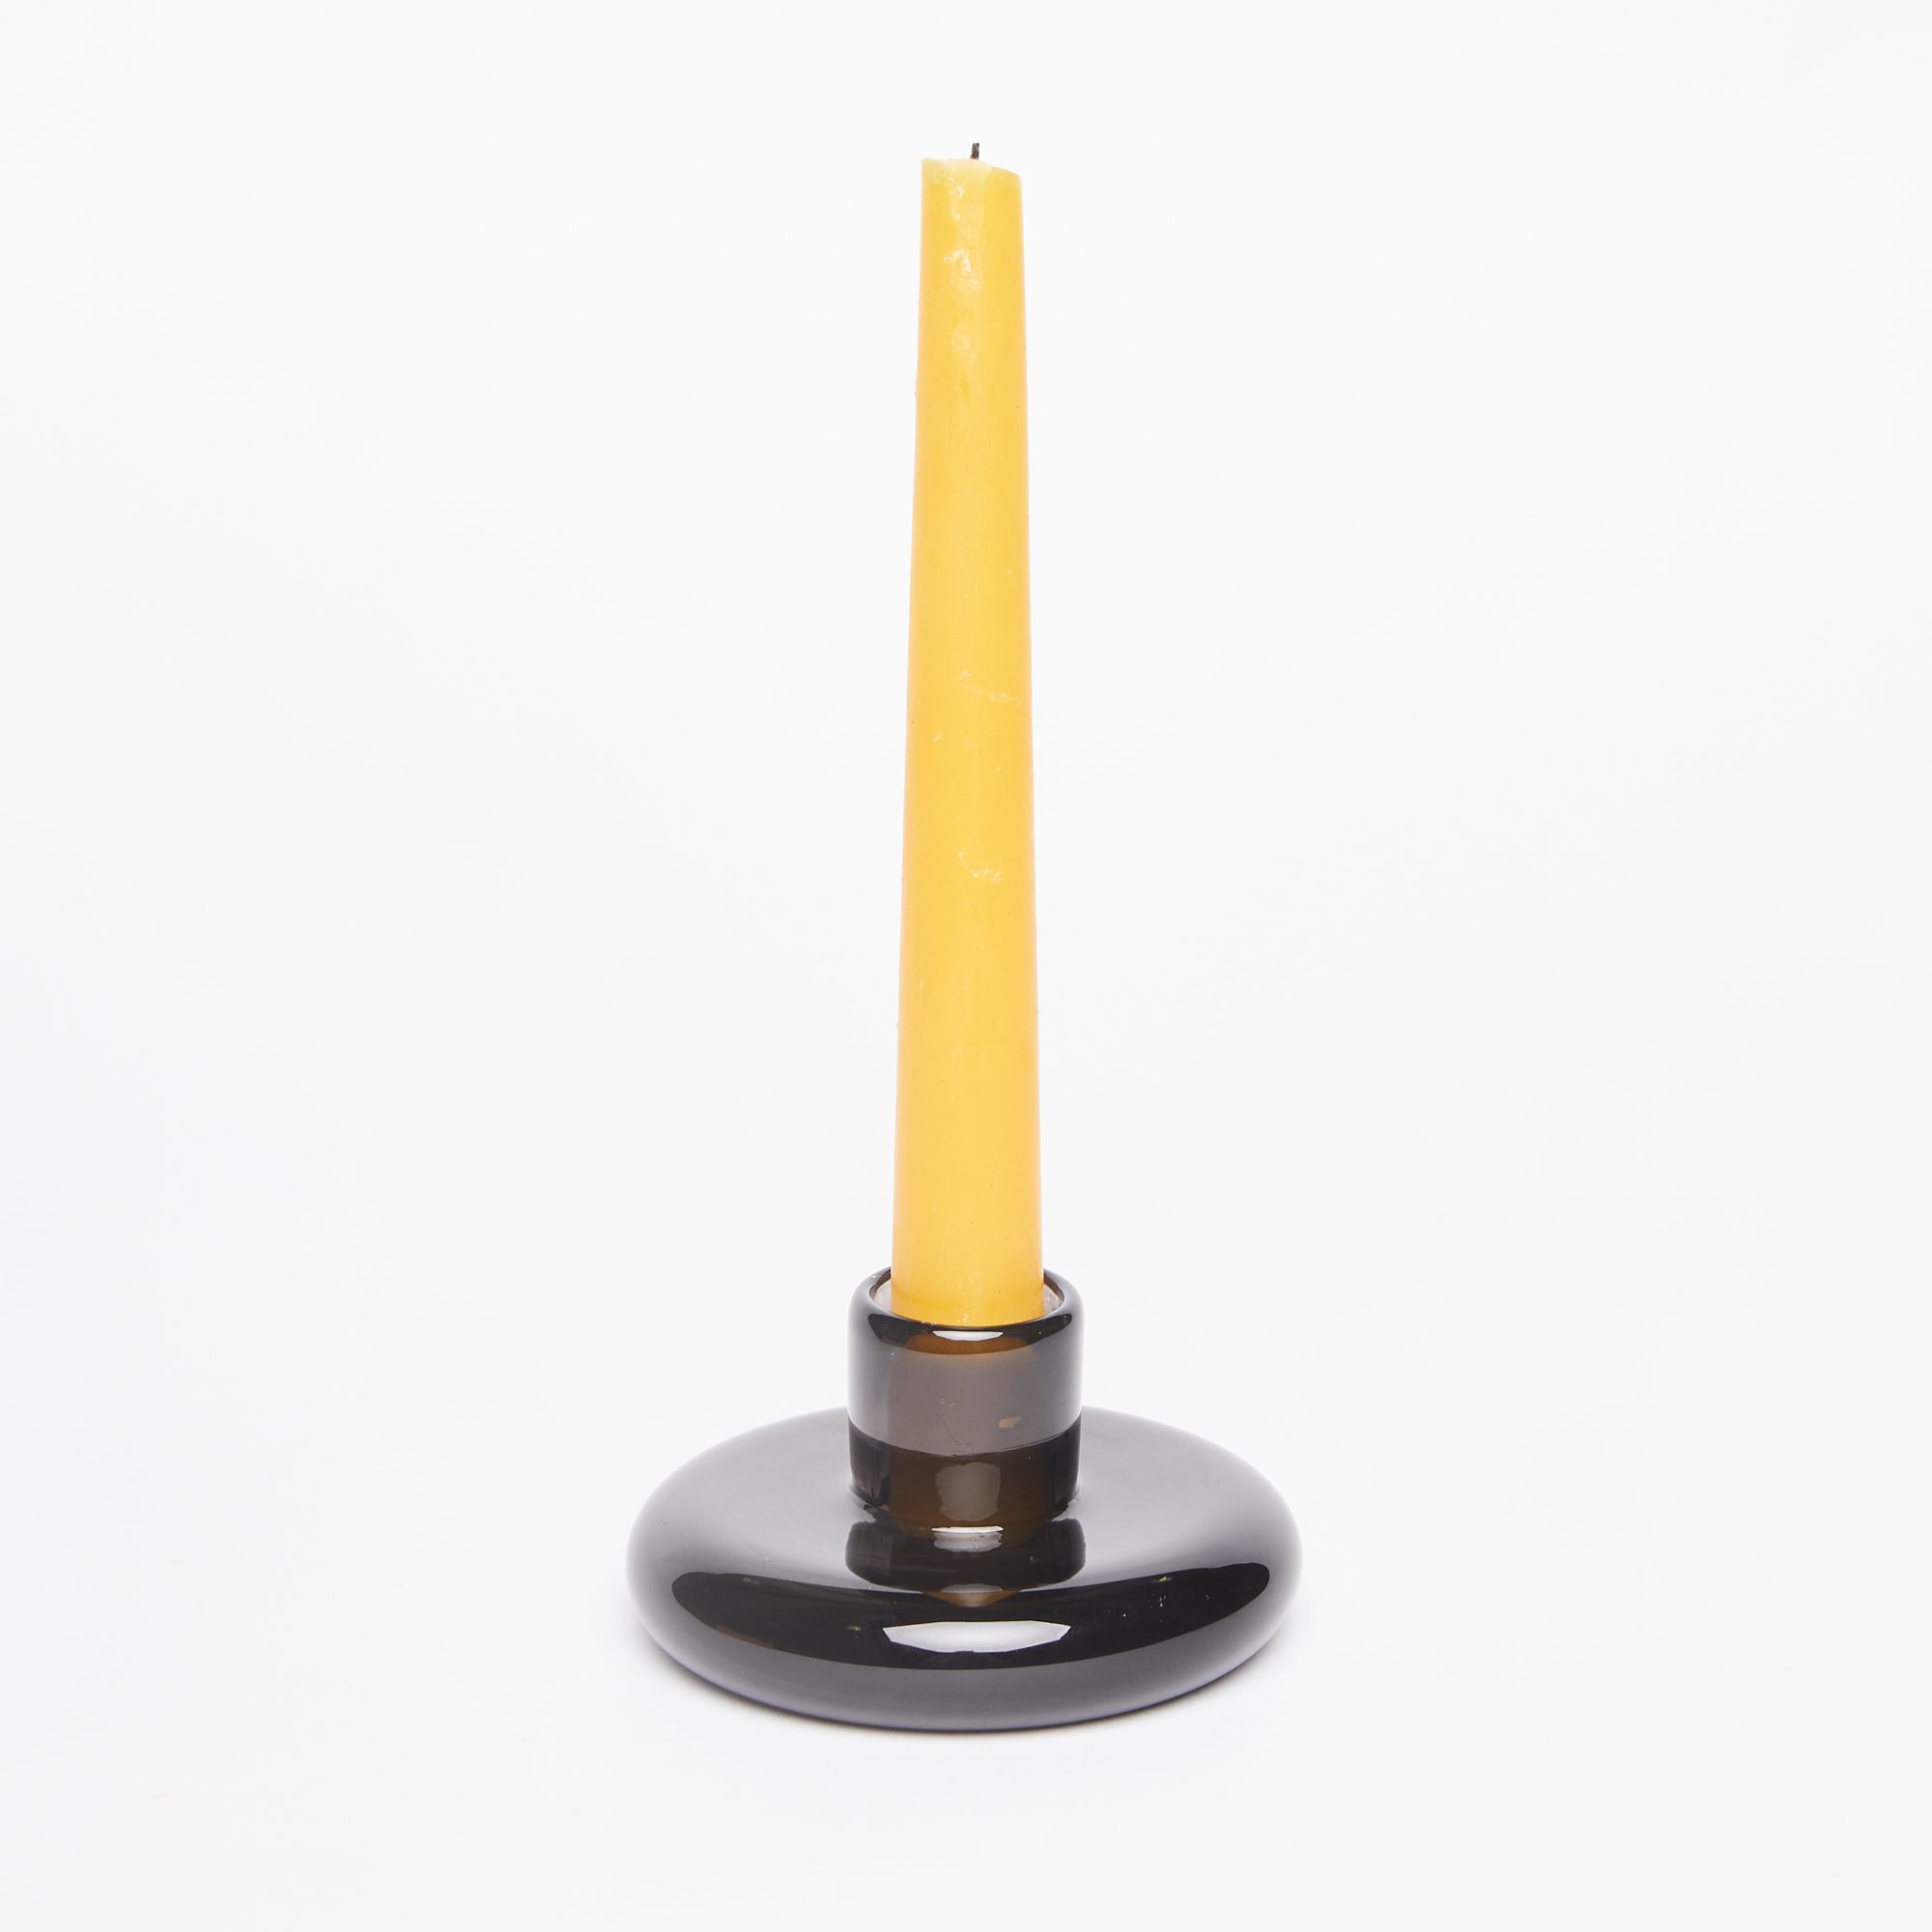 Yellow taper candle sitting in a candle holder made of a clear dark grey glass disc-like base with a small cup for the candle at center